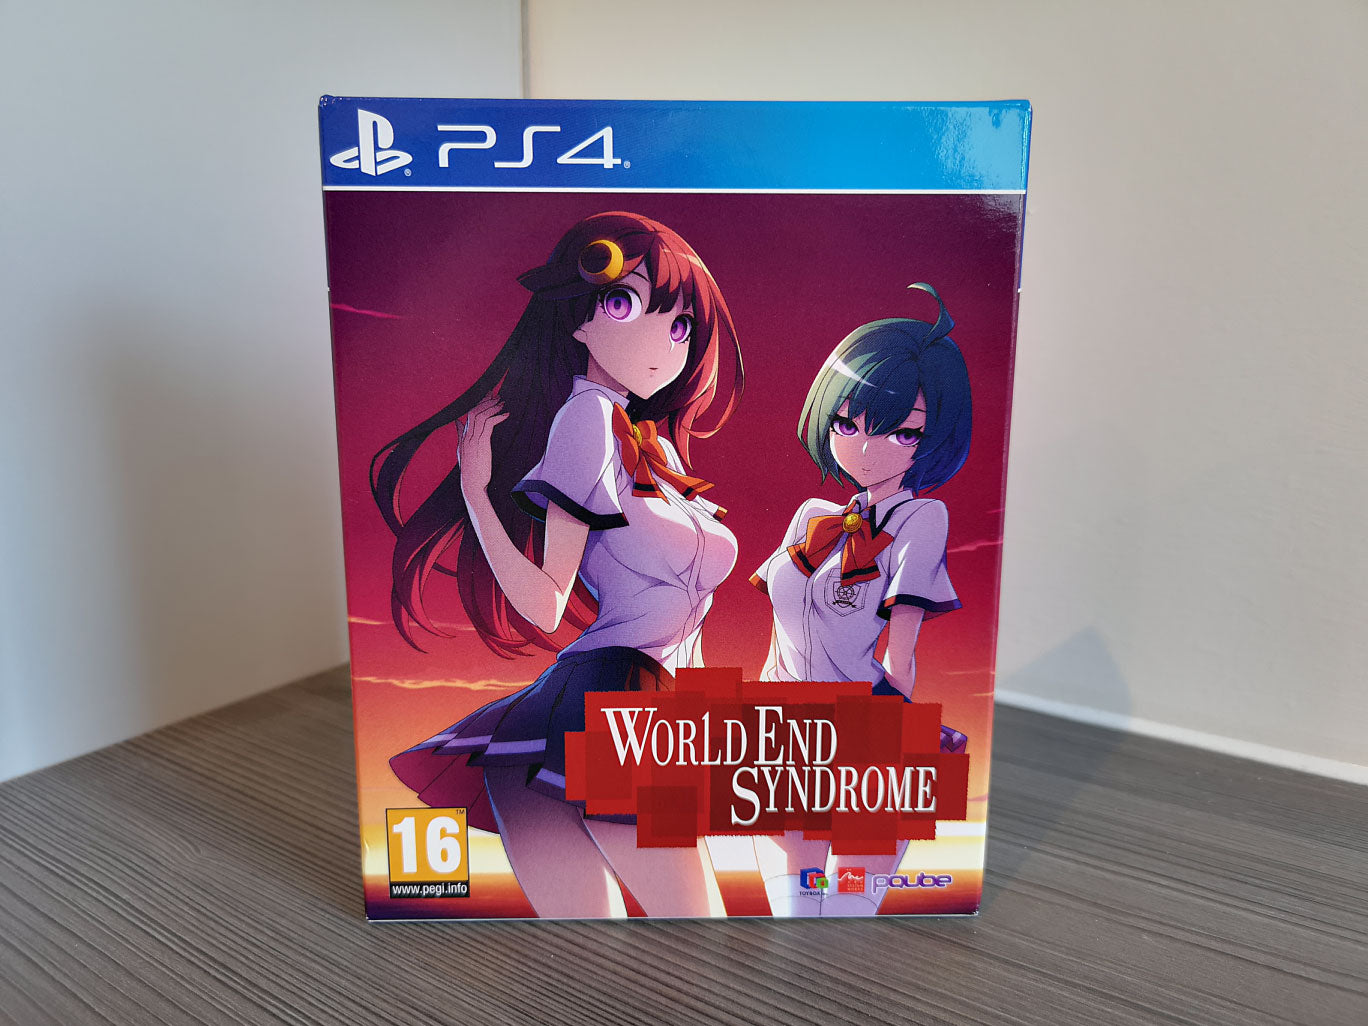 Worldend Syndrome - PS4 | Yard's Games Ltd